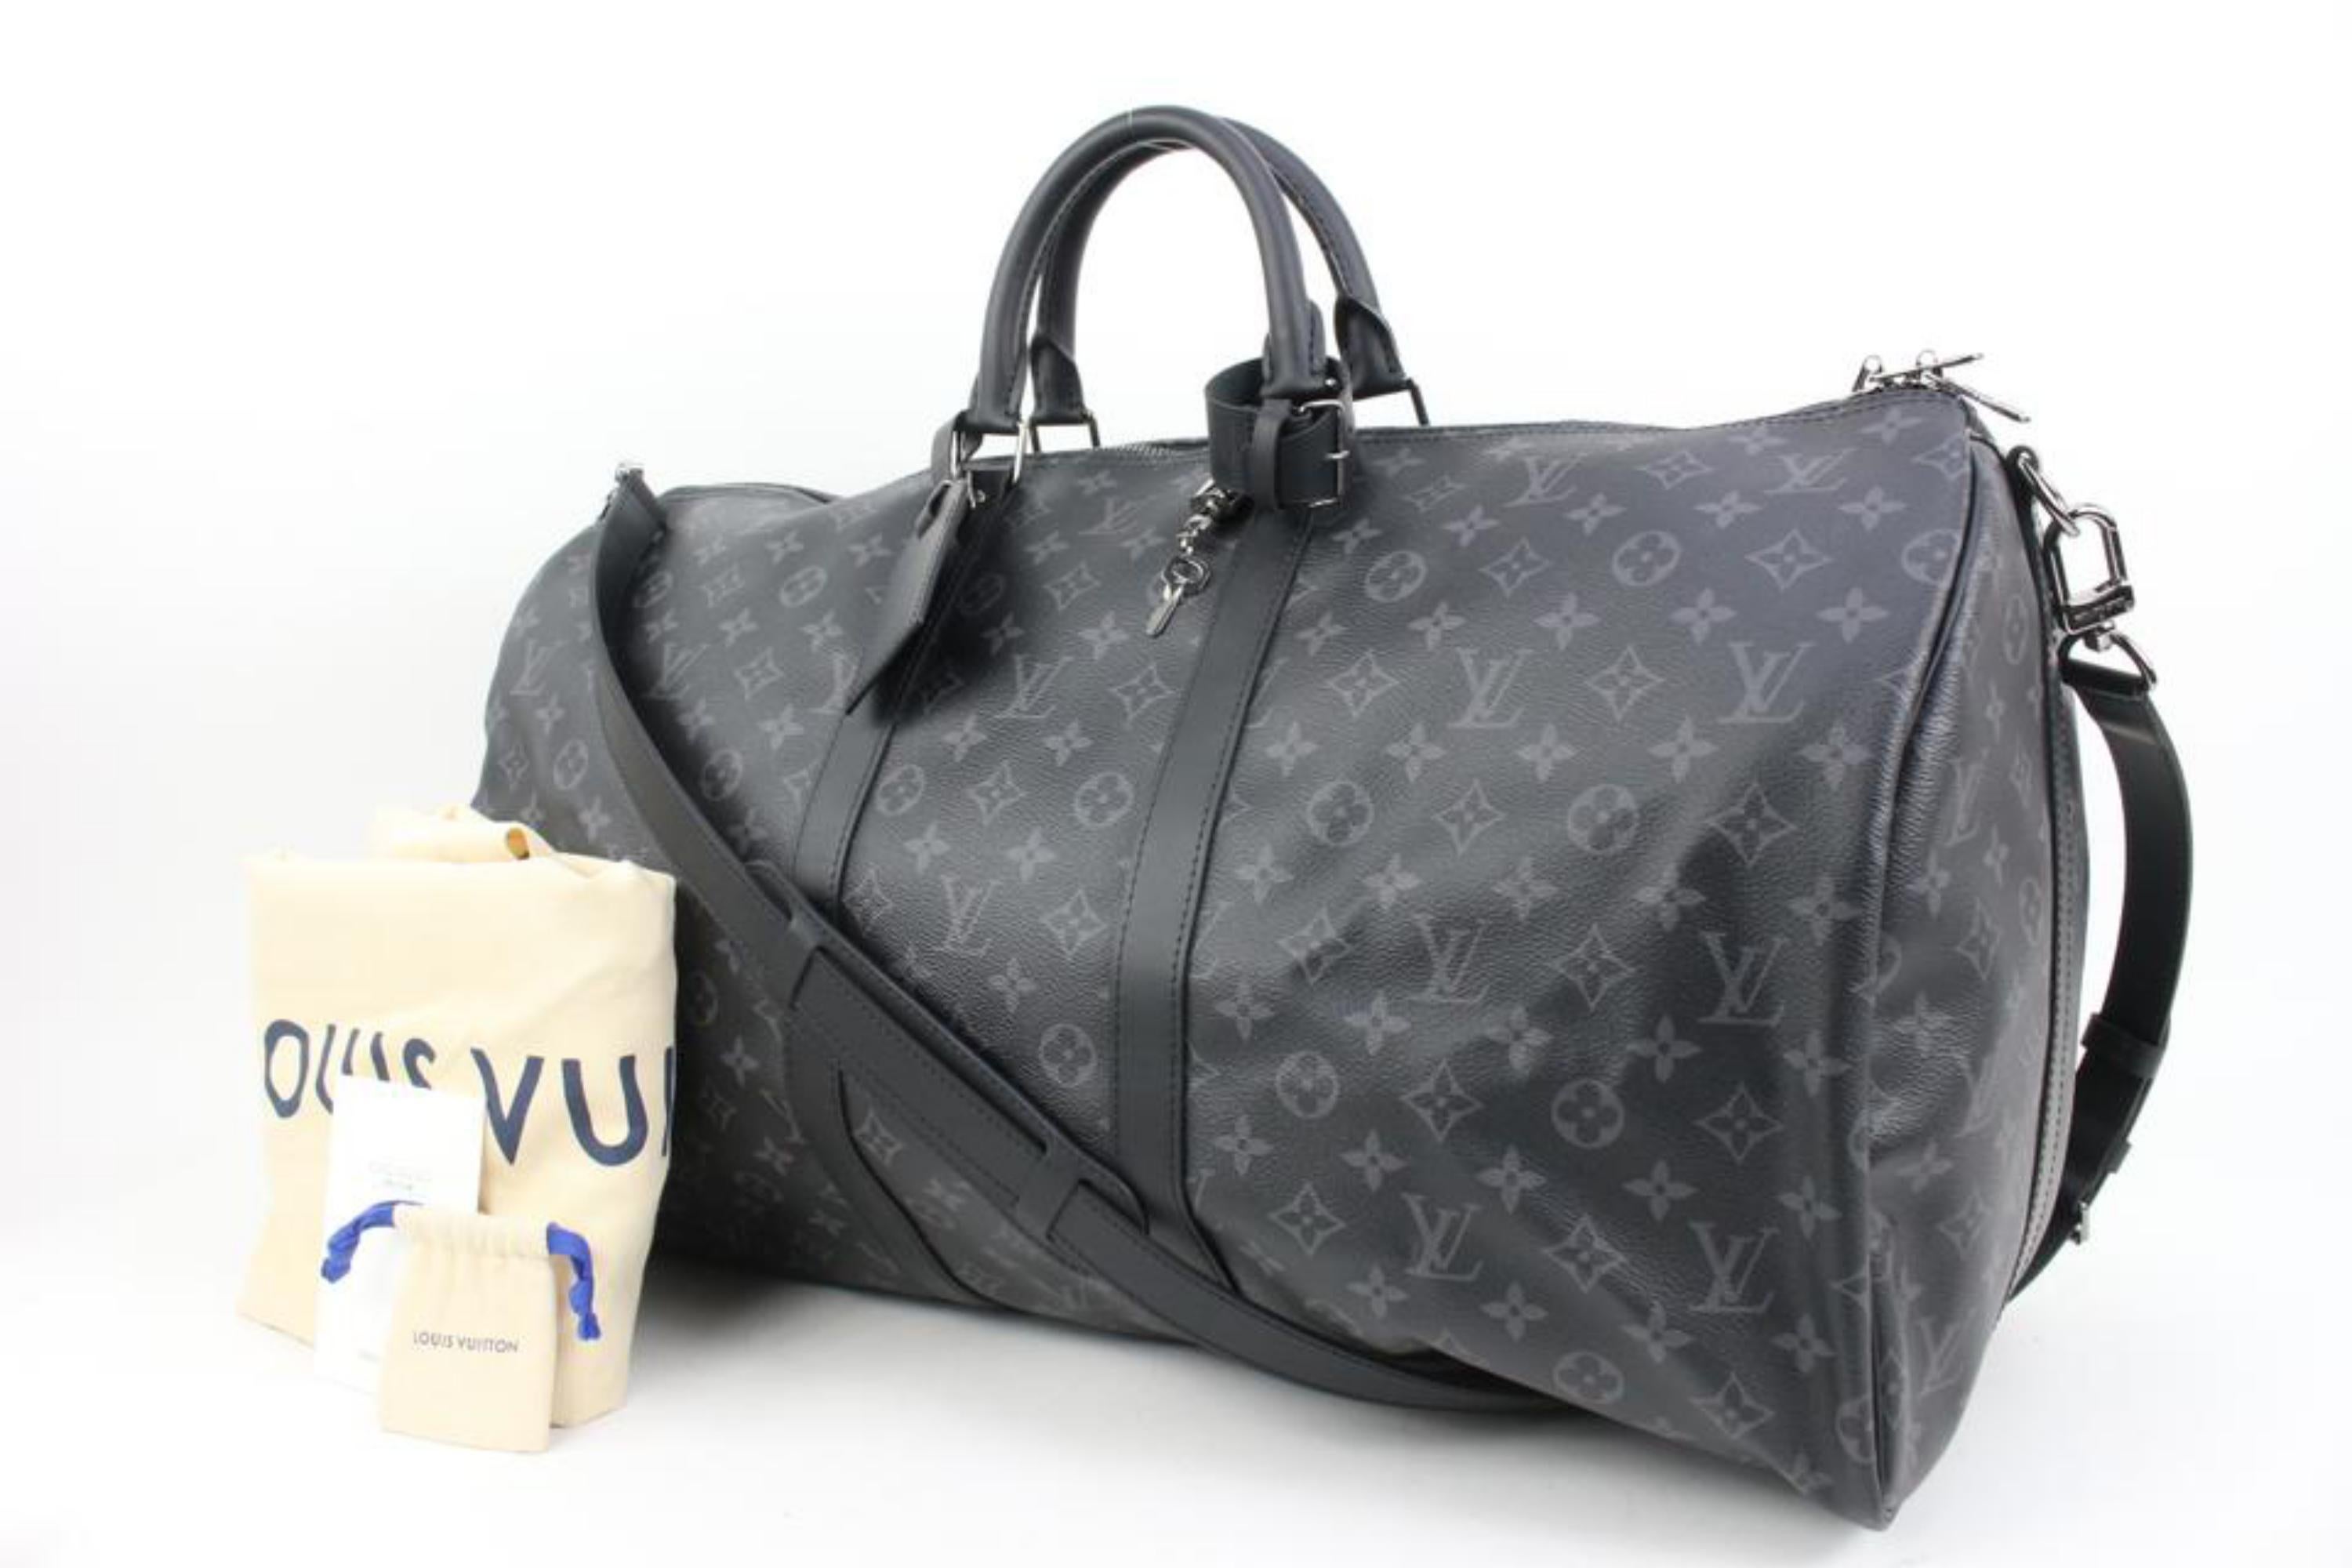 Louis Vuitton Black Monogram Eclipse Keepall Bandouliere 55 Duffle with Strap 44lk95
Date Code/Serial Number: MB1149
Made In: France
Measurements: Length:  21.5